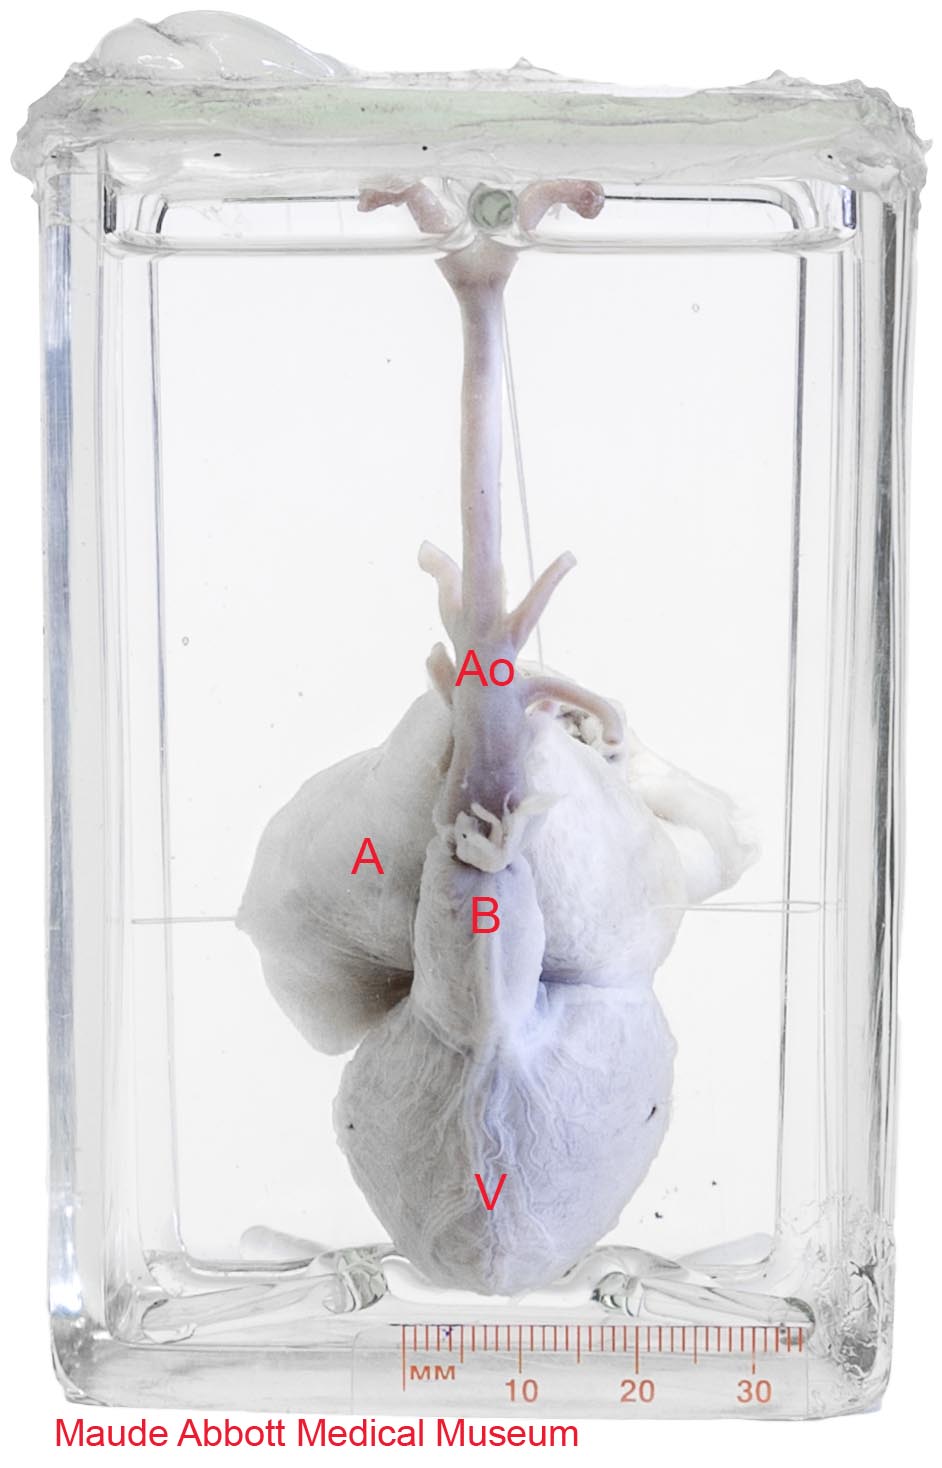 Abbott specimen 20 front view with letters